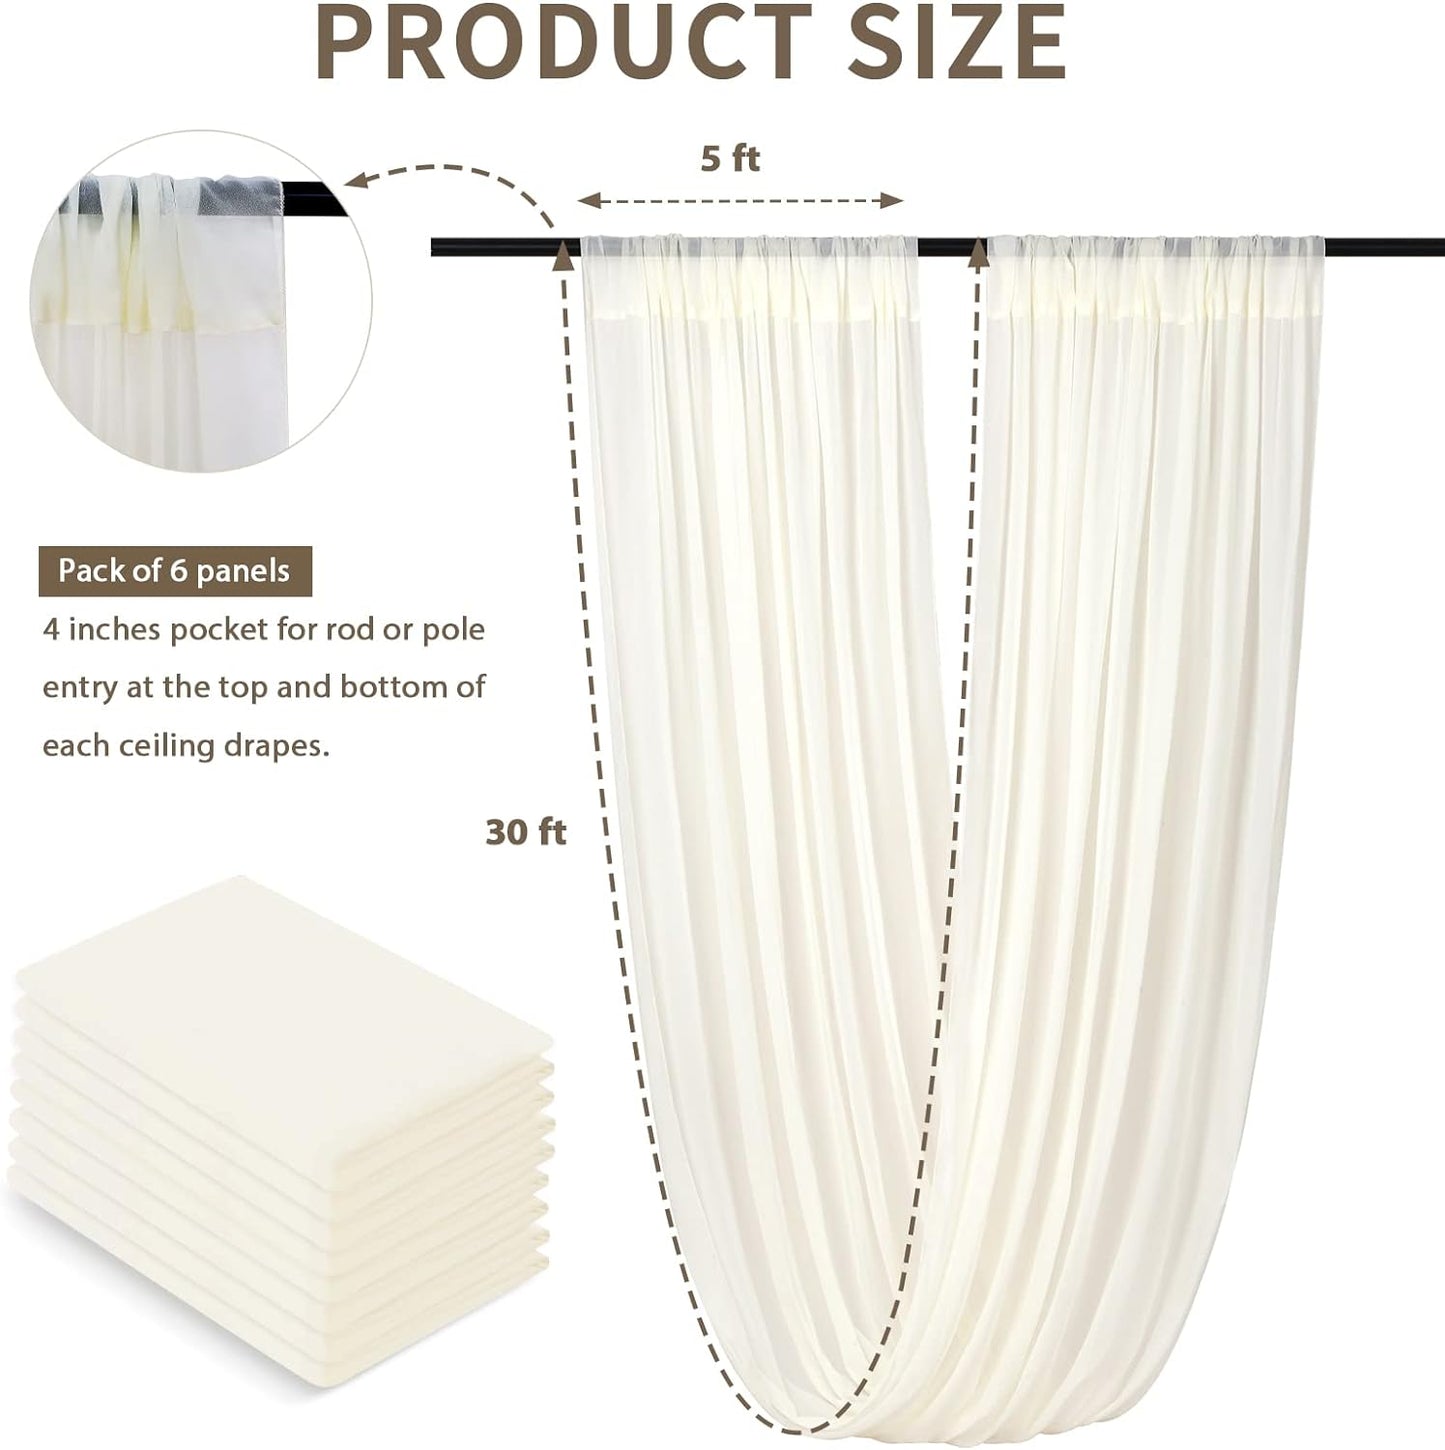 Ivory Ceiling Drapes 6 Panels 5ftx10ft Wedding Arch Draping Fabric Chiffon Wedding Drapes Curtain Decorations with Rod Pocket